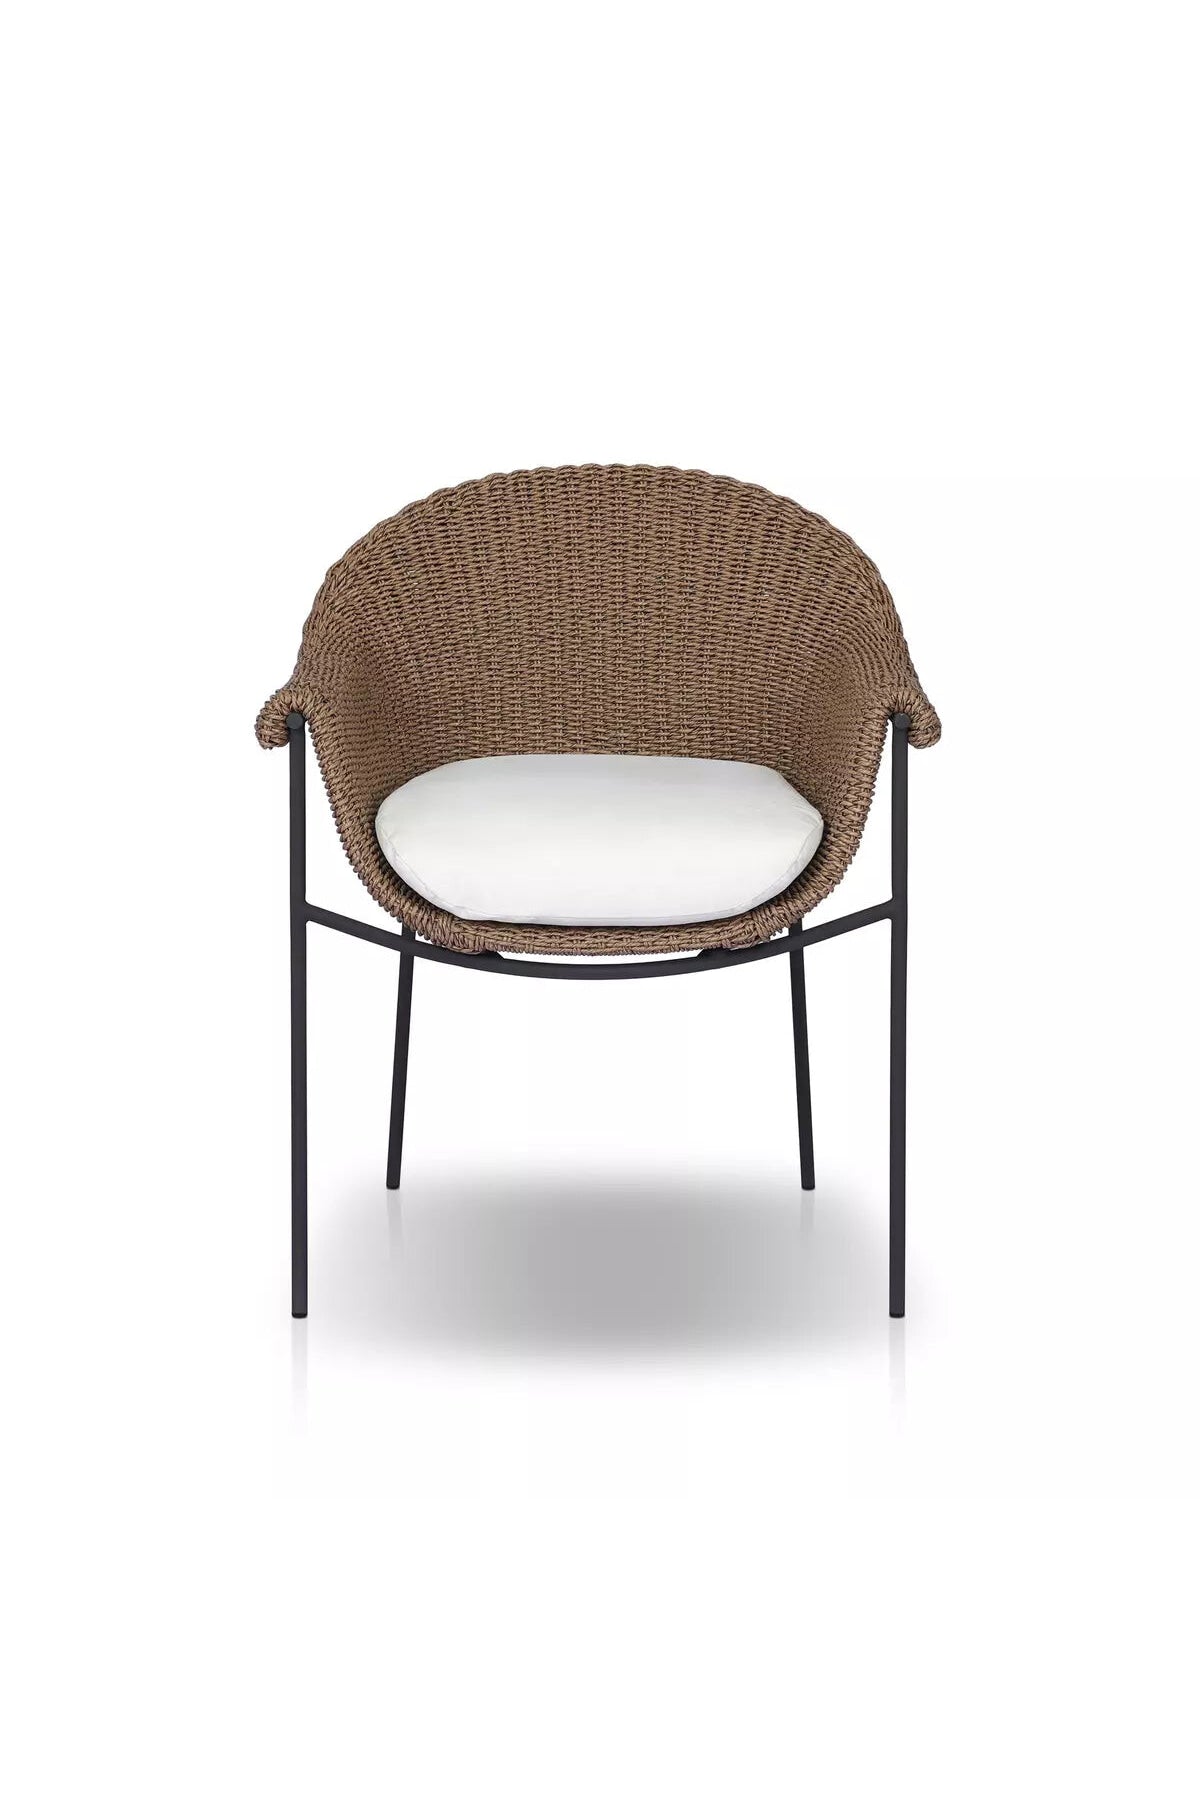 Dominica Outdoor Dining Chair - 2 Colors